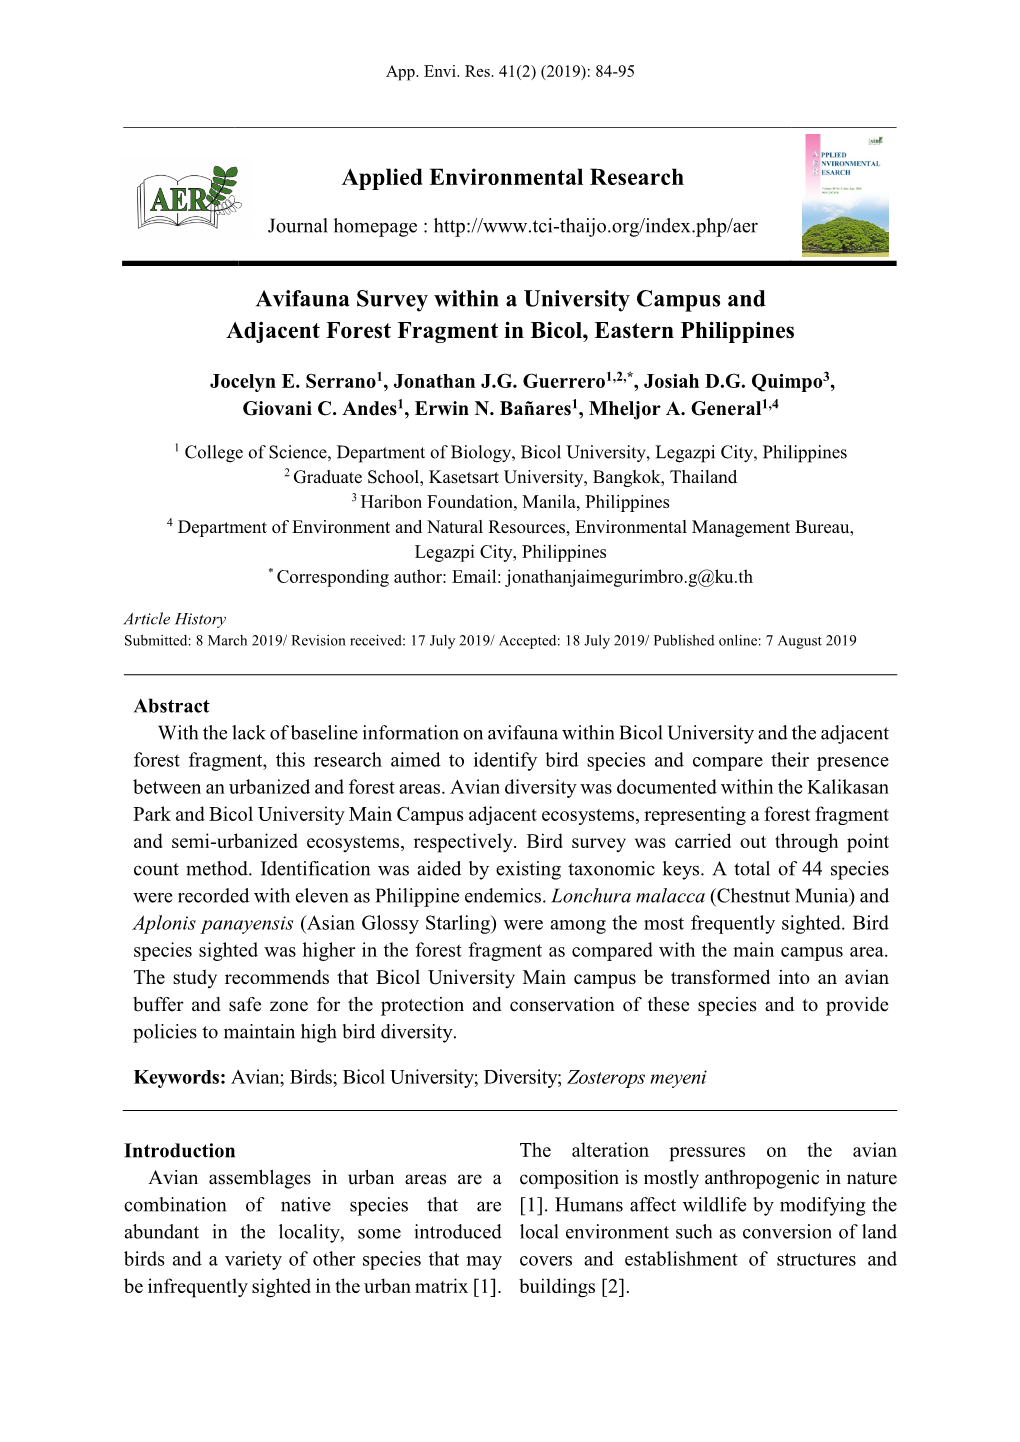 Avifauna Survey Within a University Campus and Adjacent Forest Fragment in Bicol, Eastern Philippines Applied Environmental